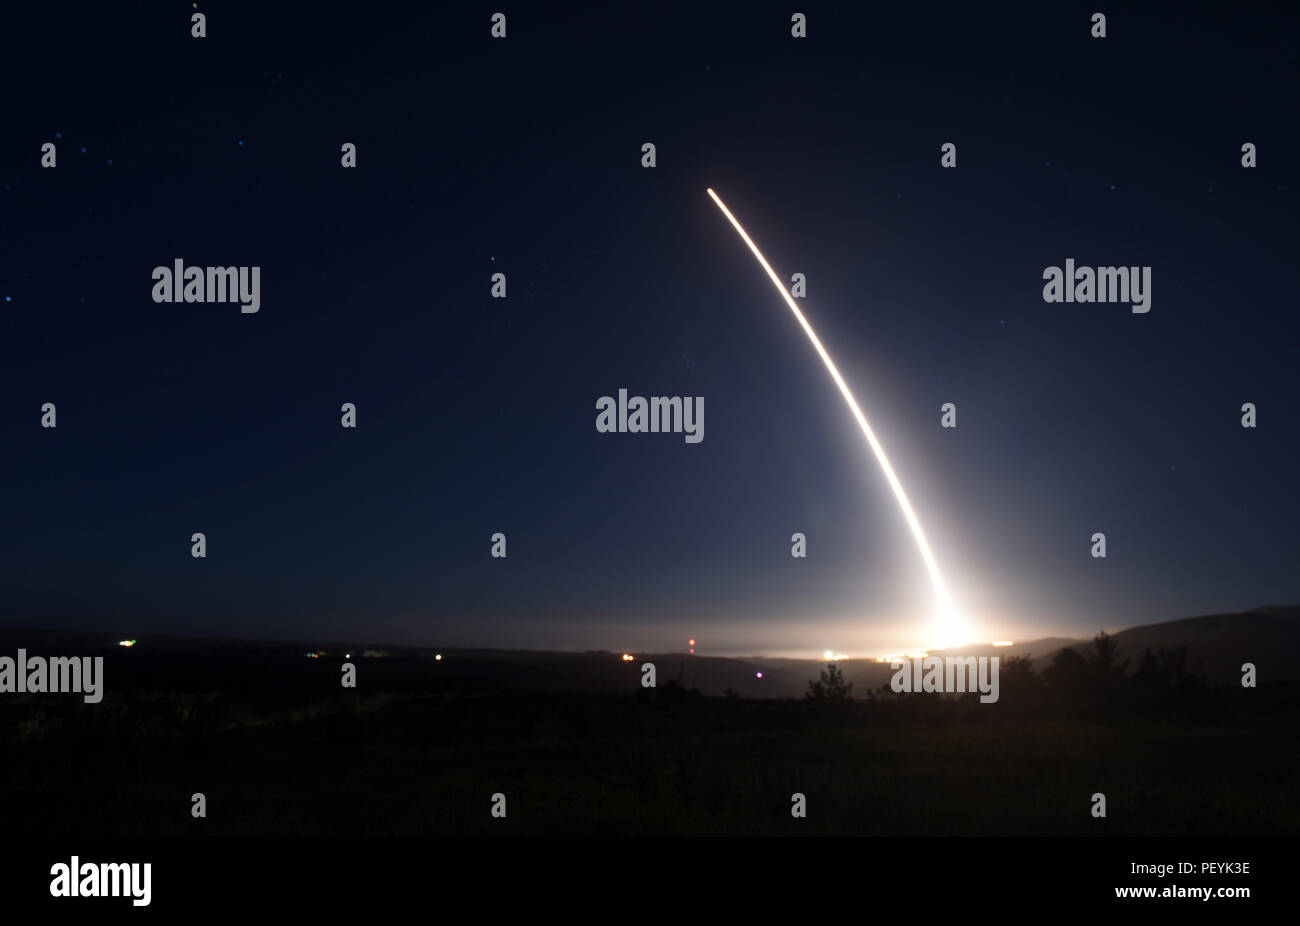 An unarmed Minuteman III intercontinental ballistic missile launches during an operational test at 11:34 p.m., Feb. 20, 2016, Vandenberg Air Force Base, Calif. Stock Photo